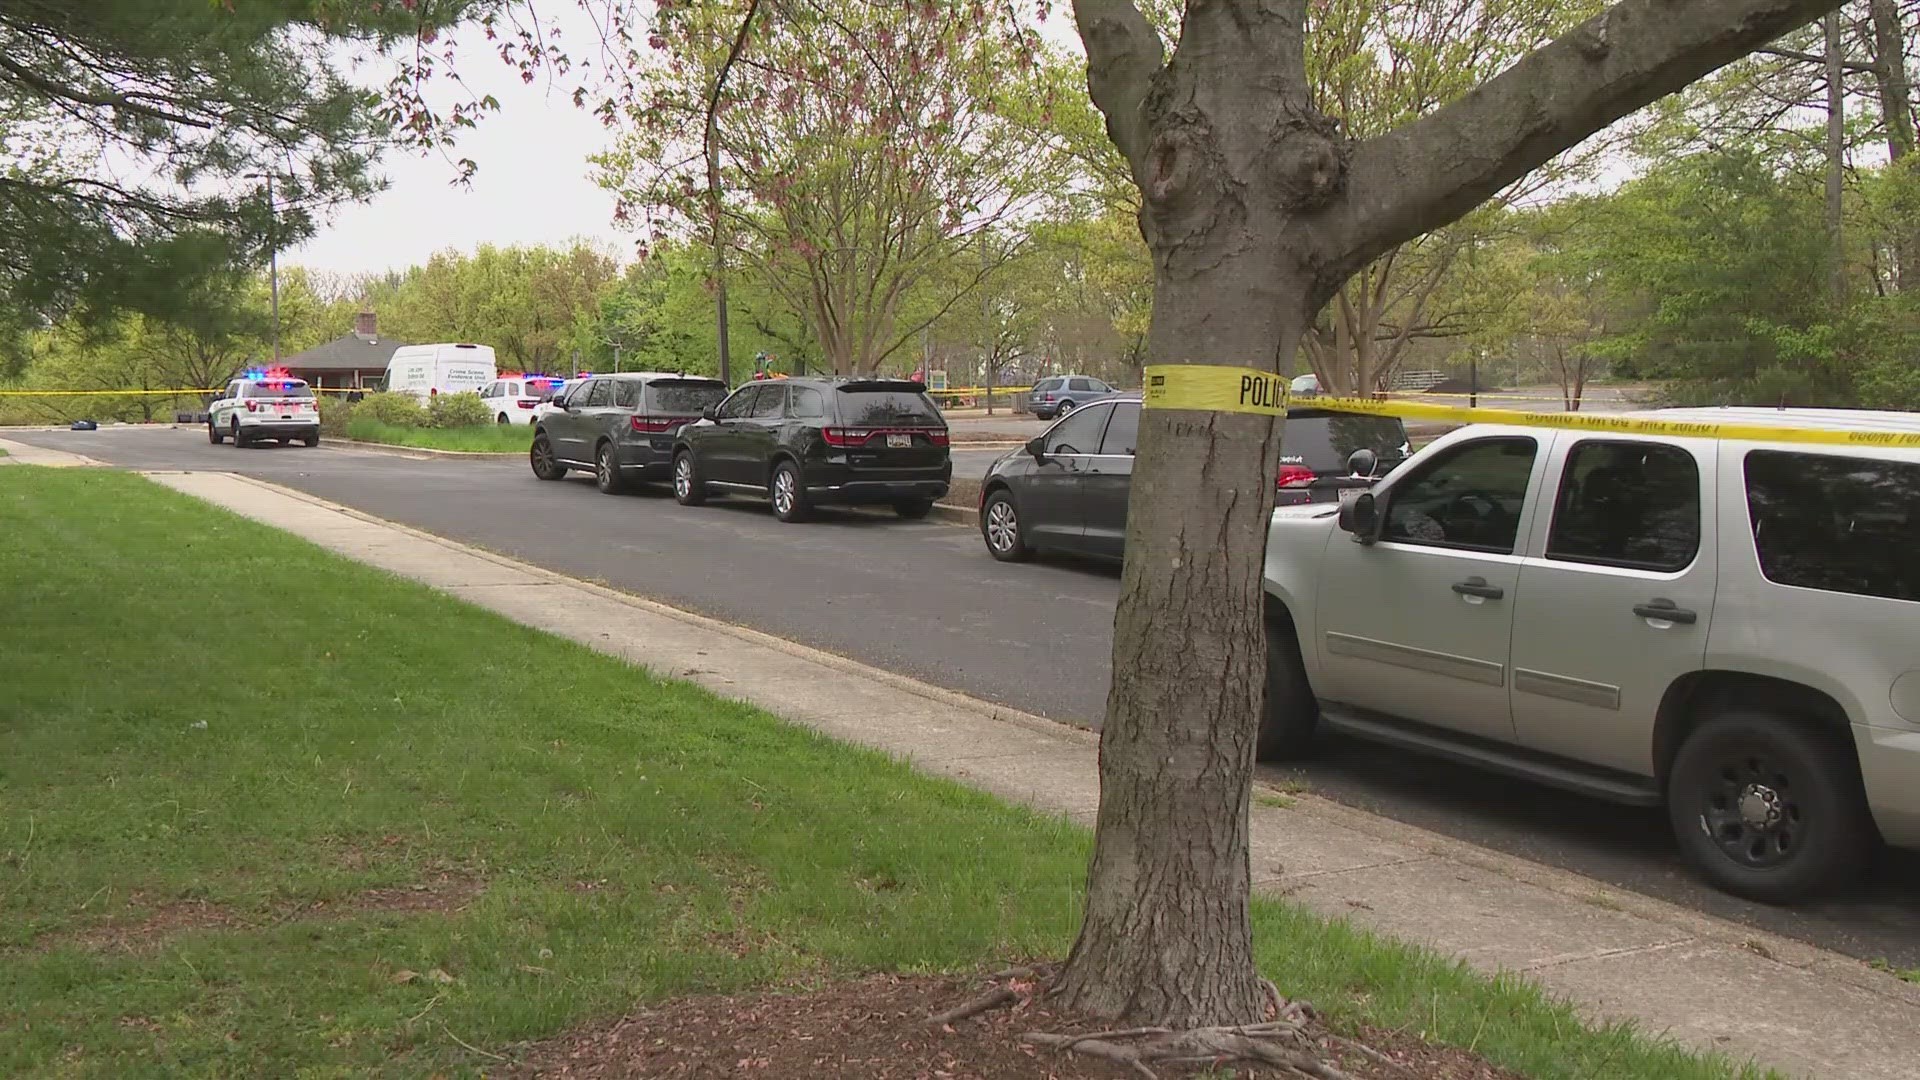 Police say shots rang out during a senior skip day gathering for Bowie students.